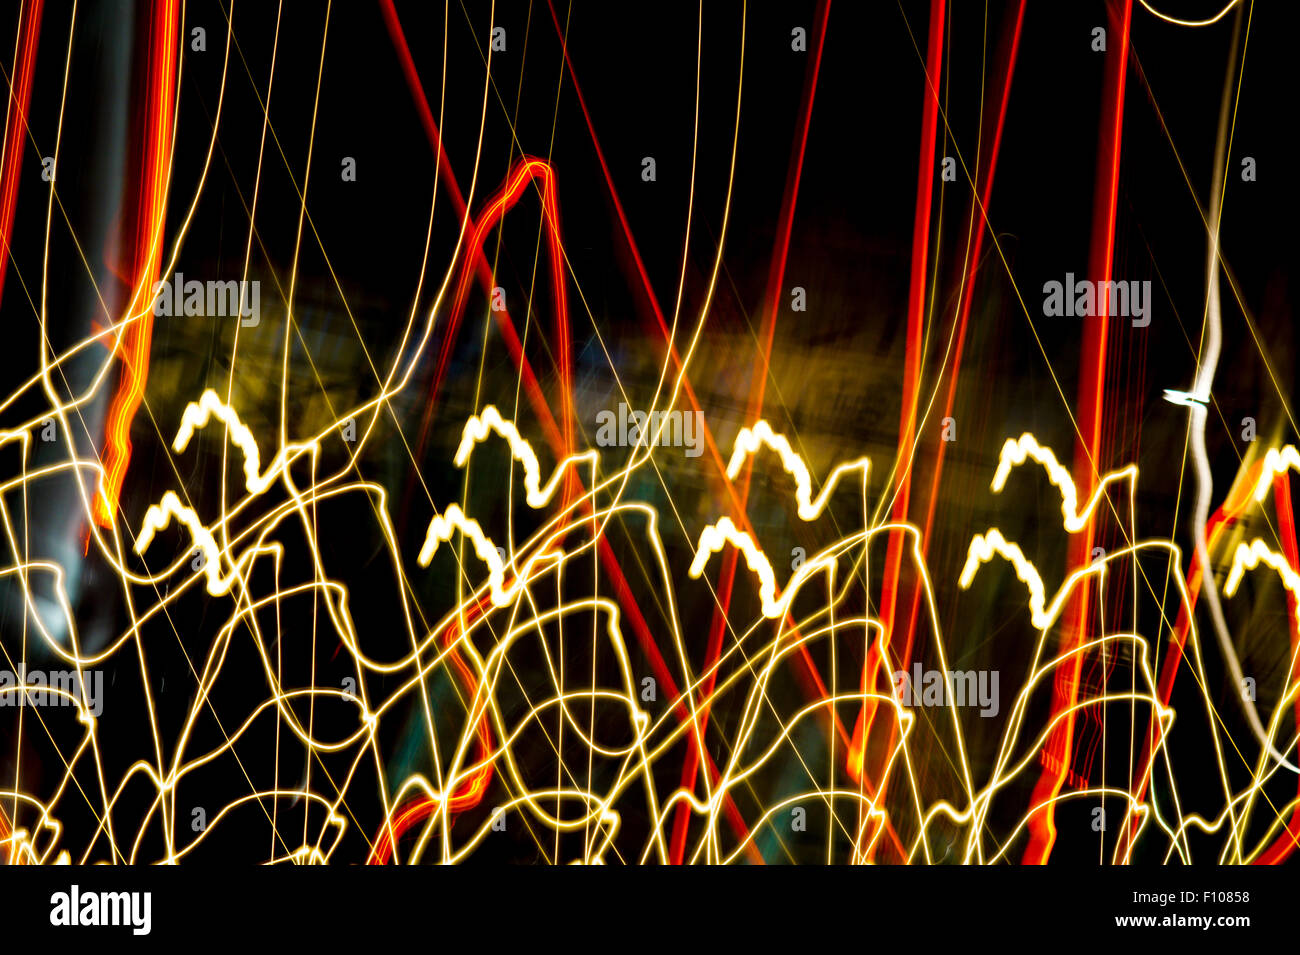 Abstract City light trails on black background Stock Photo